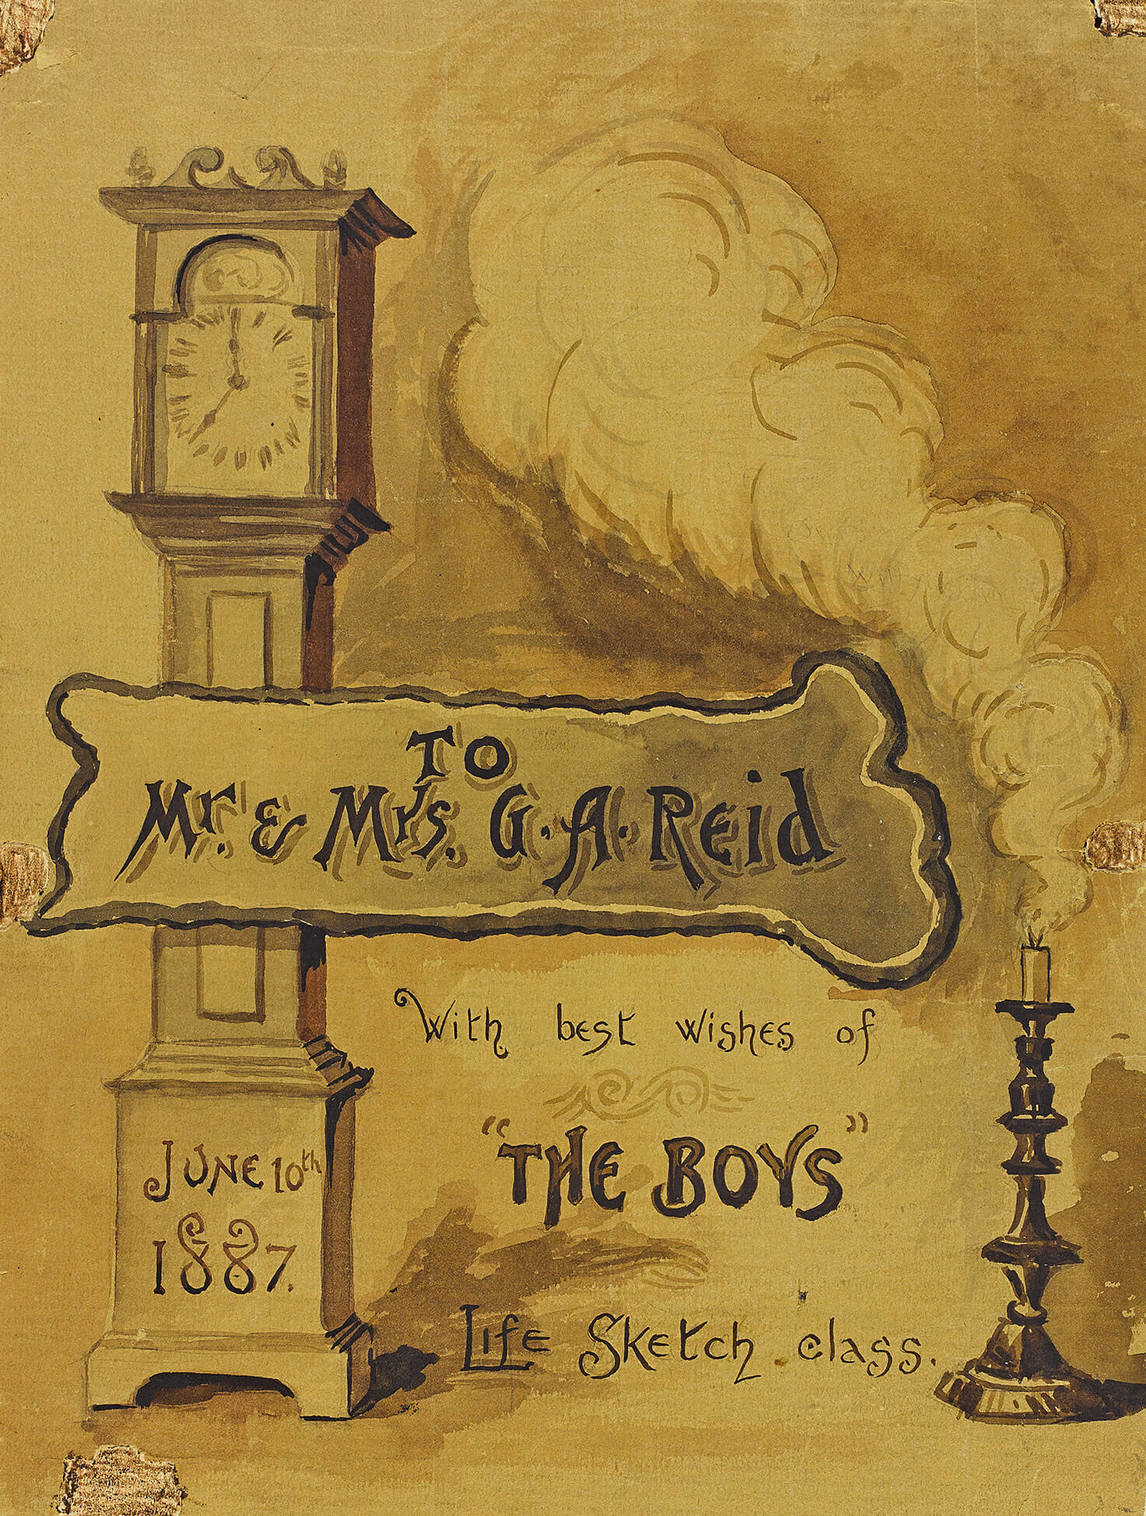 Drawing in ink presented to George Agnew and Mary Hiester Reid by their students, June 10, 1887